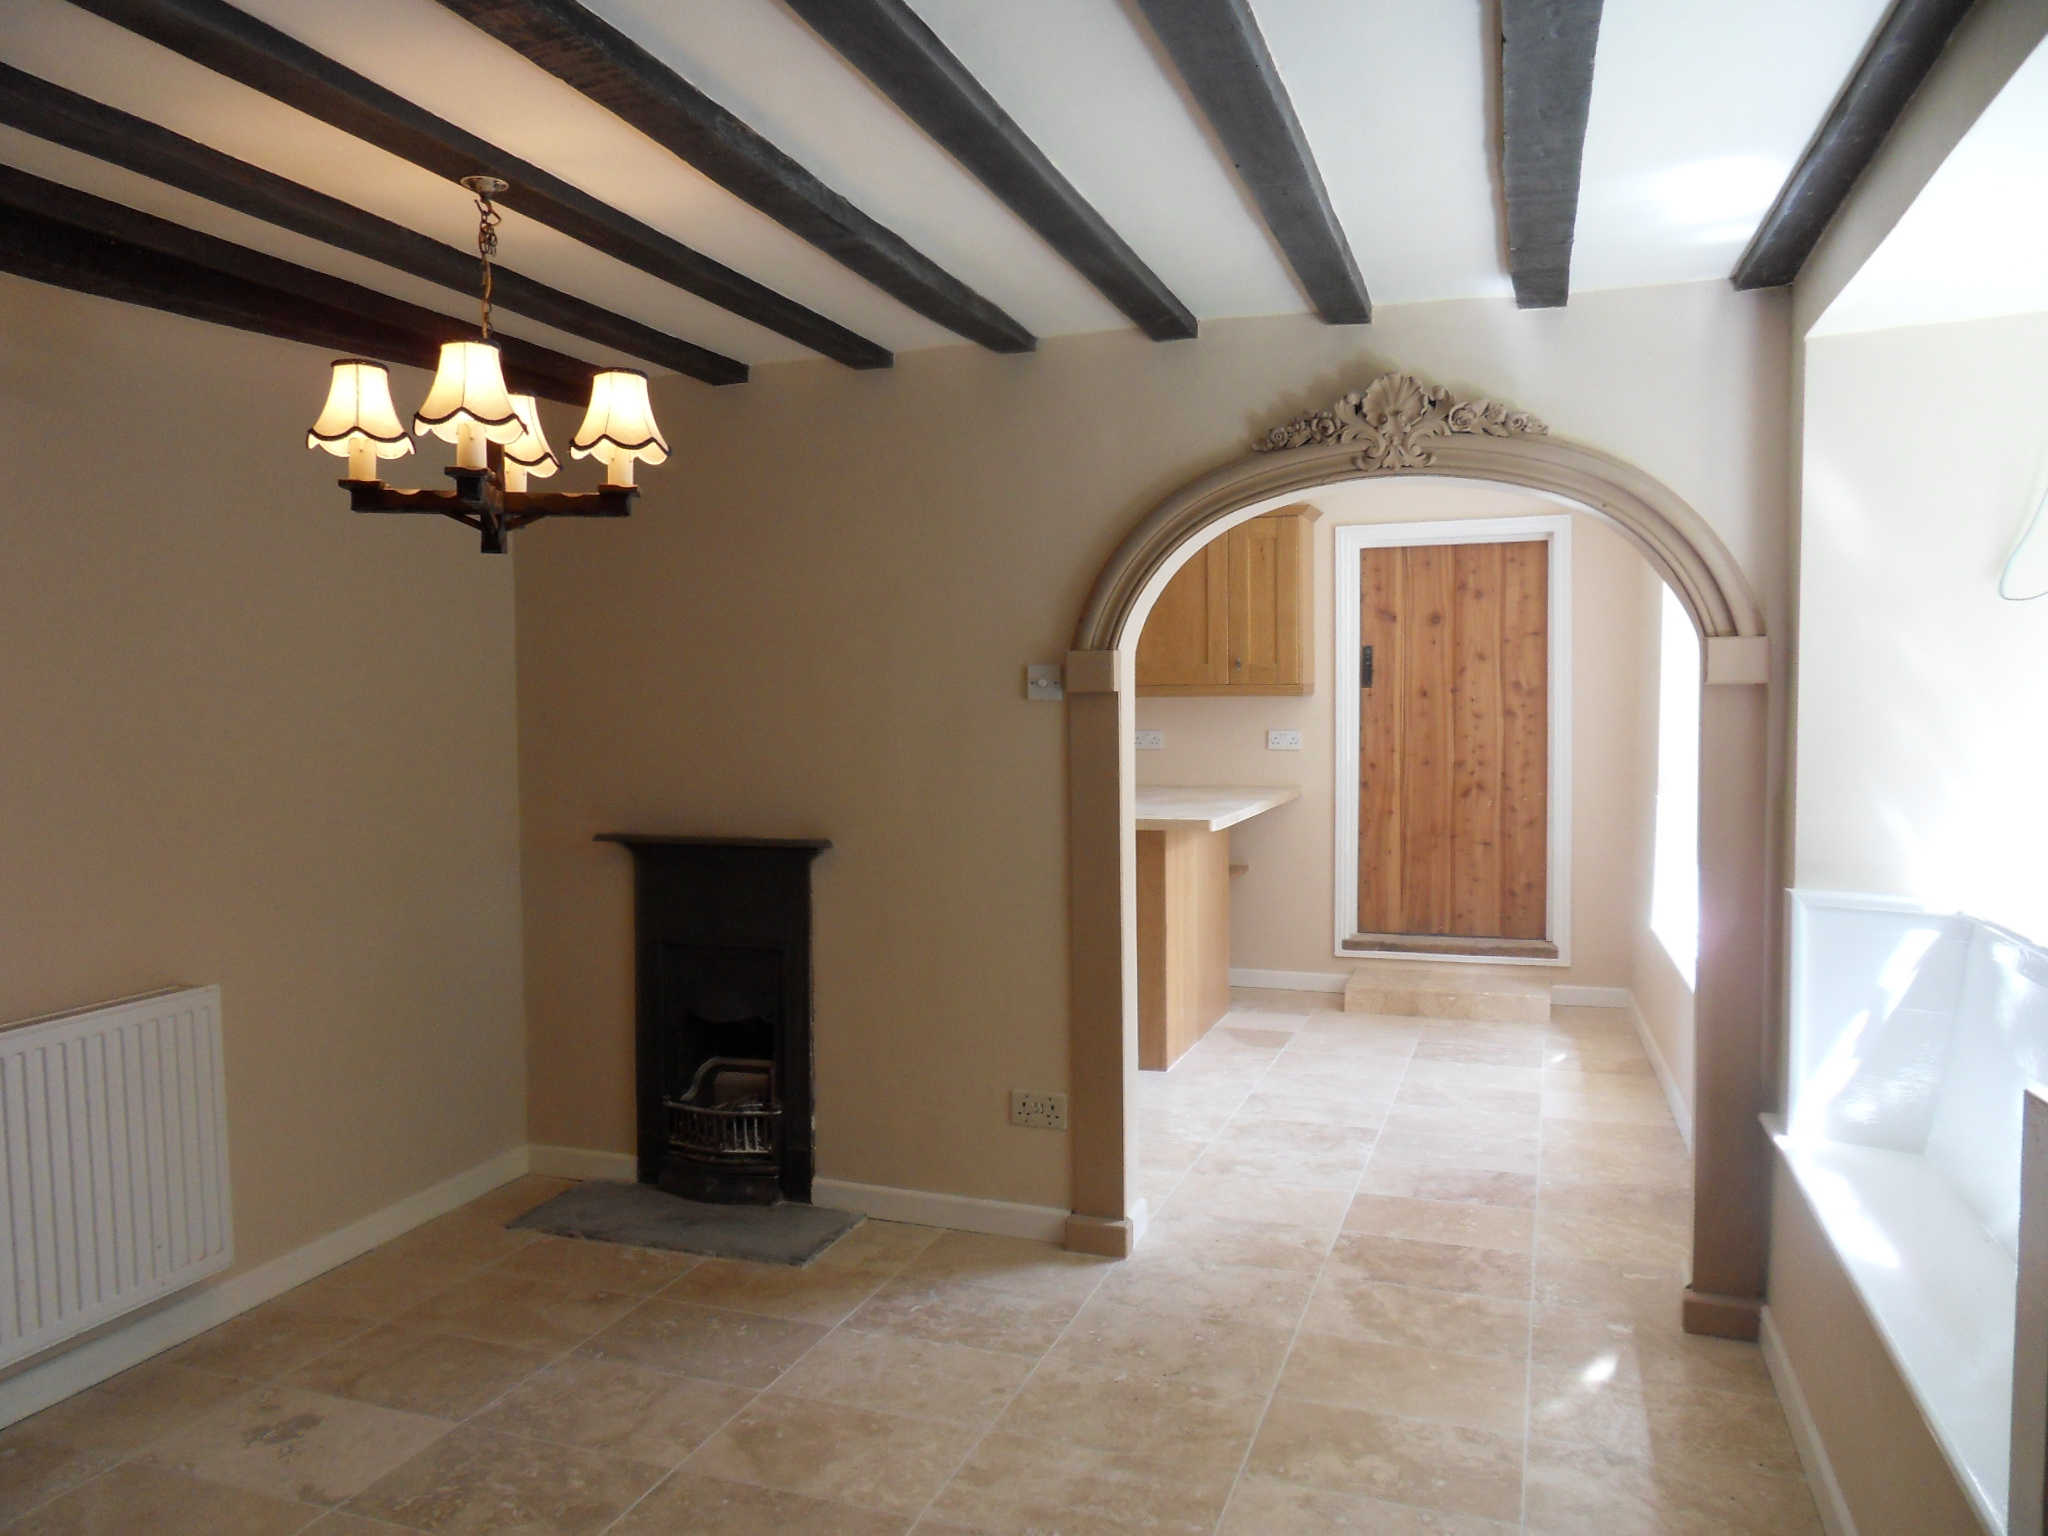 Internal archway and fireplace